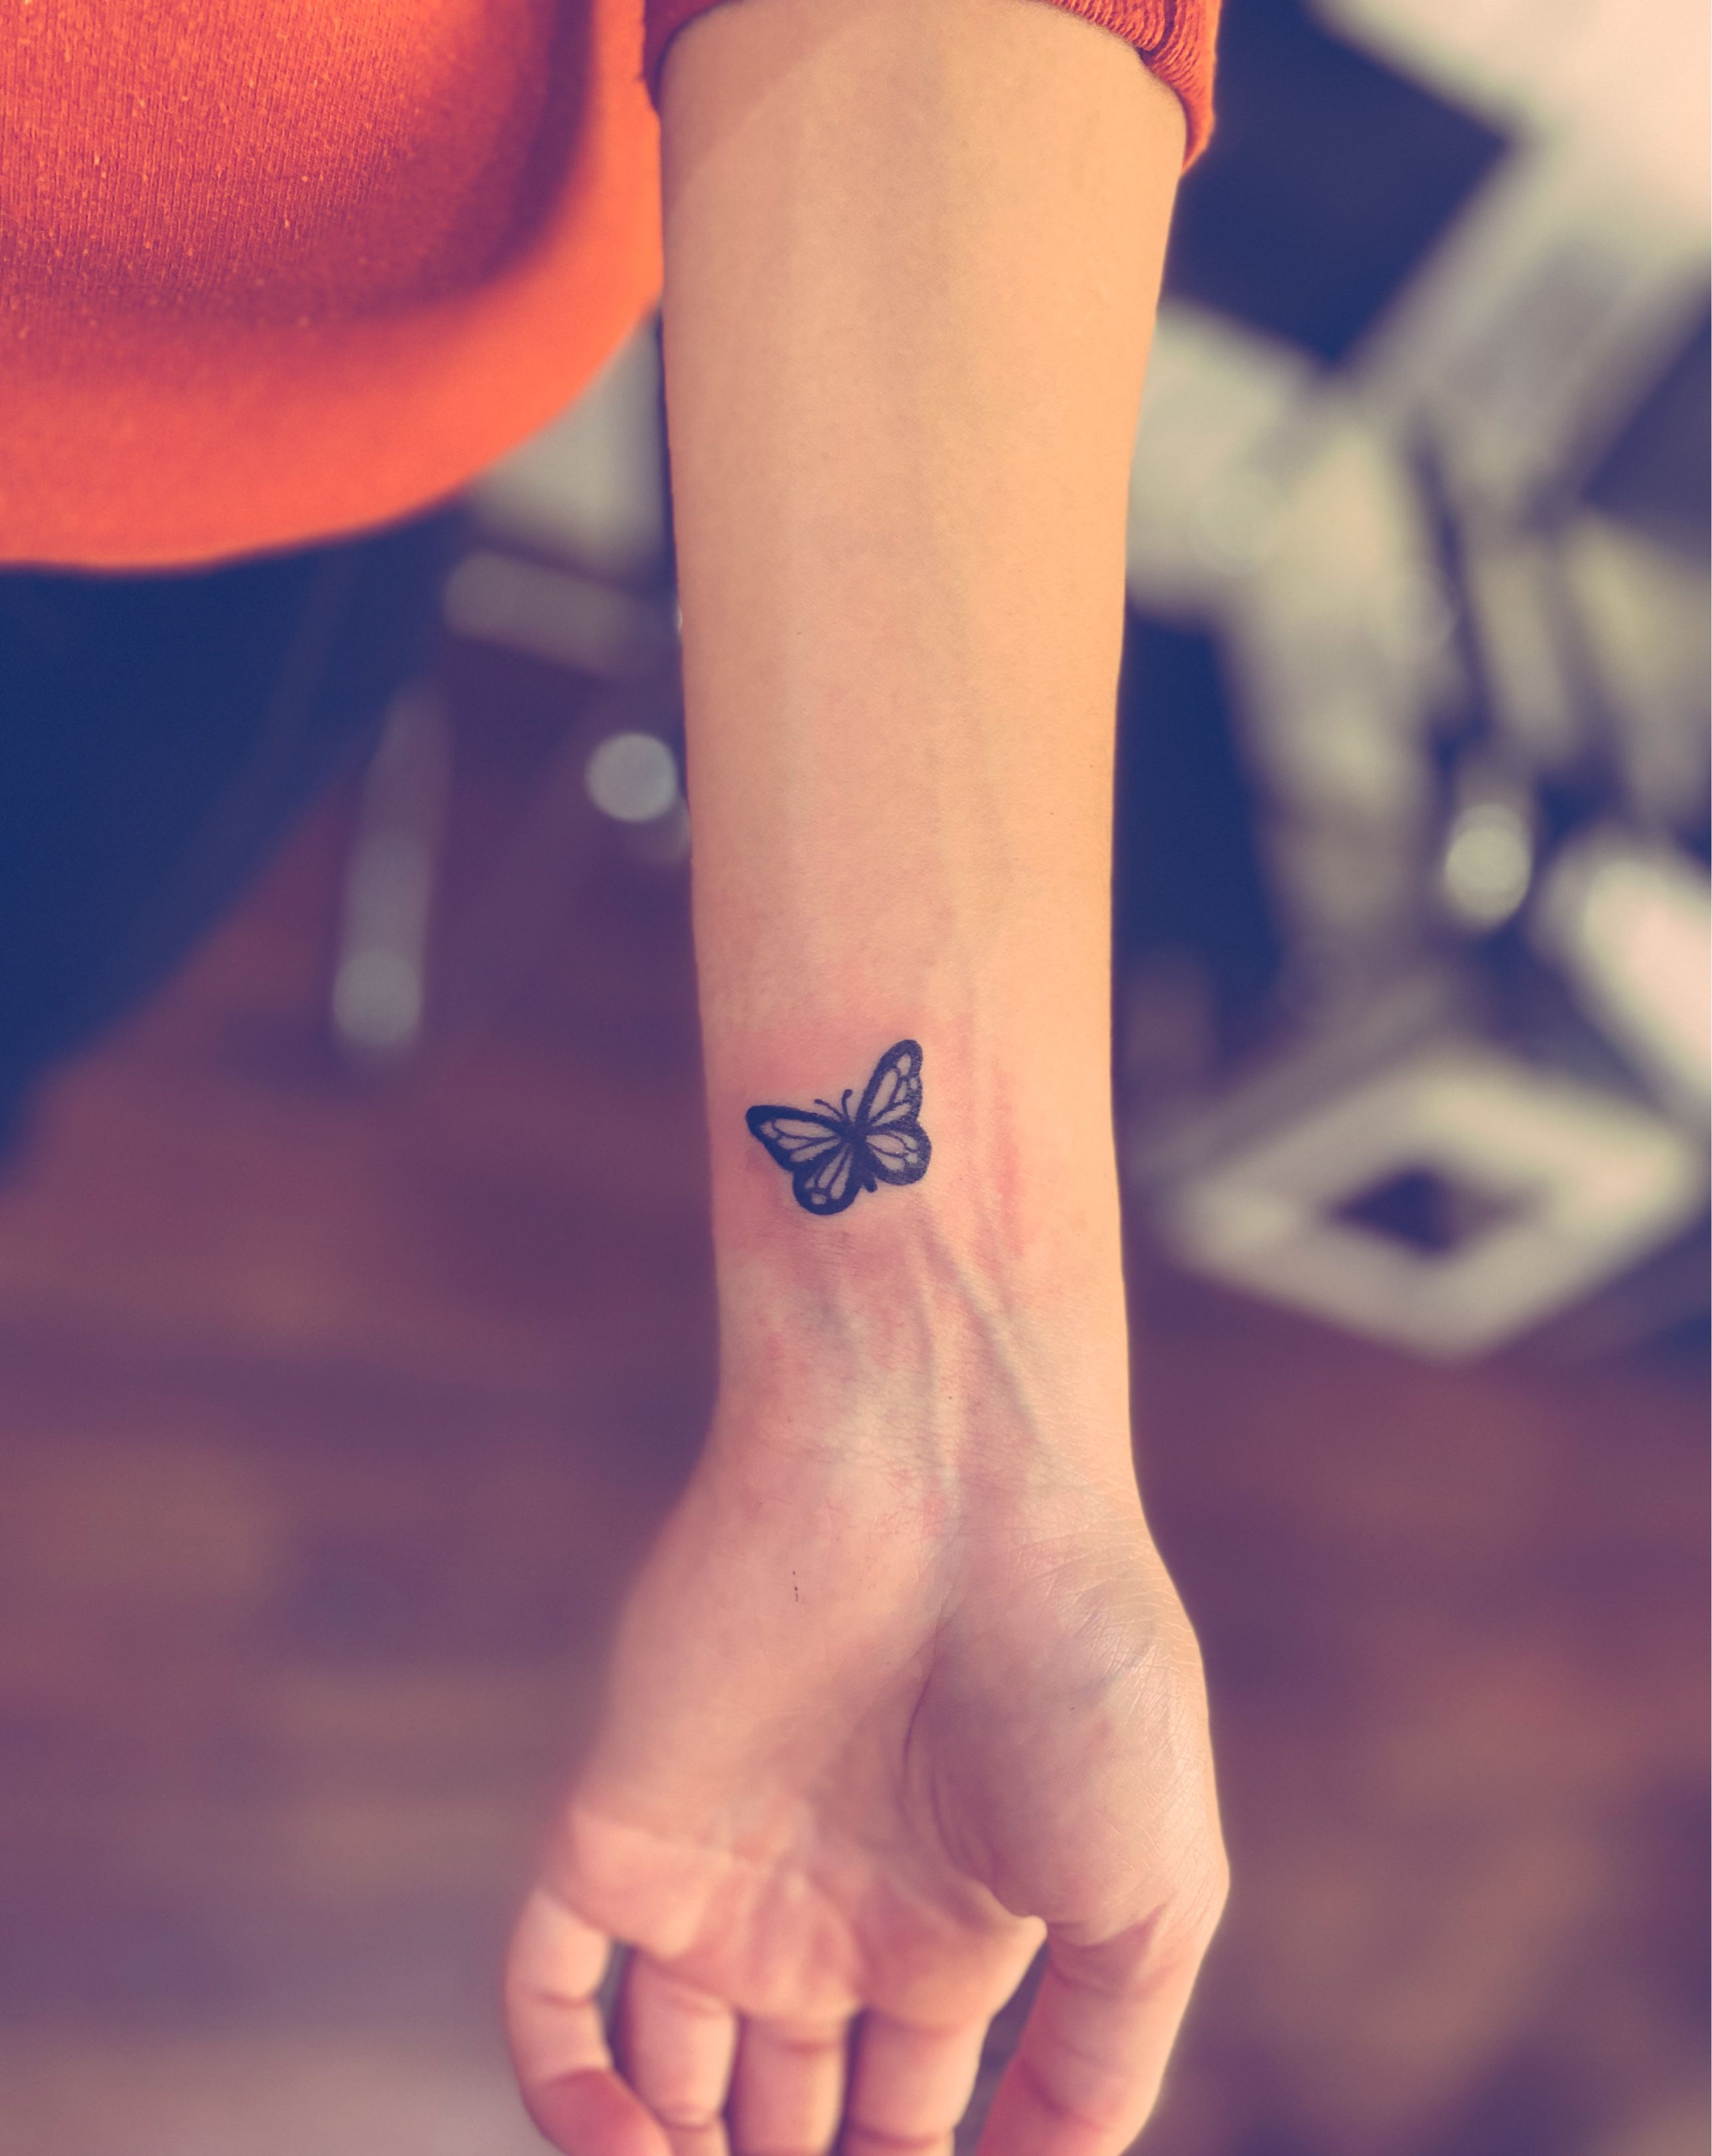 Tiny Tattoo Idea - 14 Cute Tiny Wrist Tattoos You'll Want to Get  Immediately - TattooViral.com | Your Number One source for daily Tattoo  designs, Ideas & Inspiration